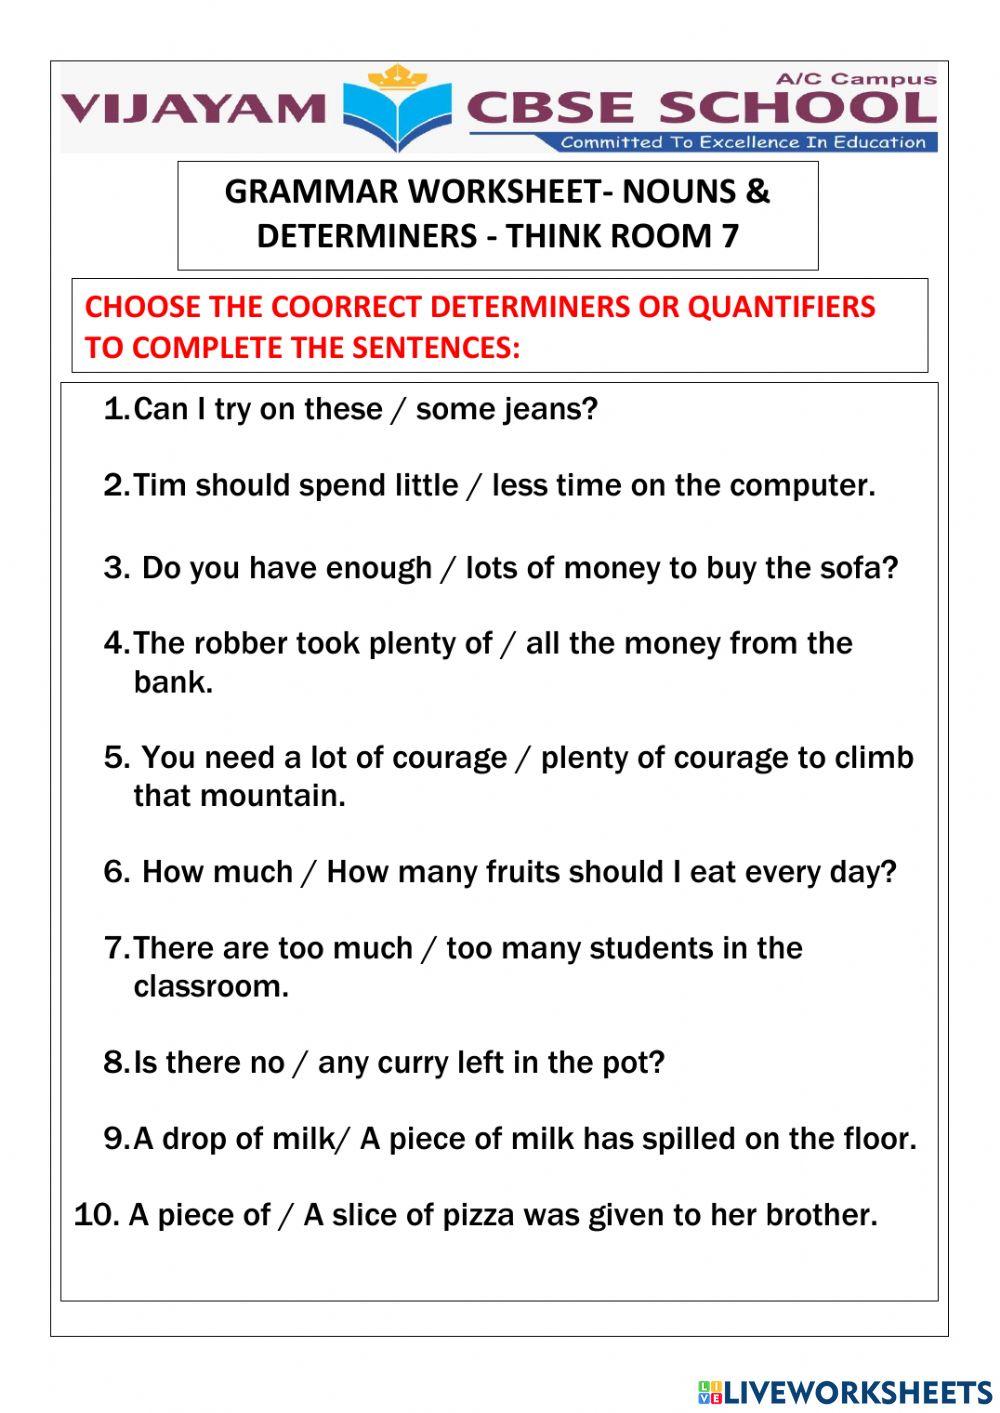 Determiners for nouns- THINKROOM 7